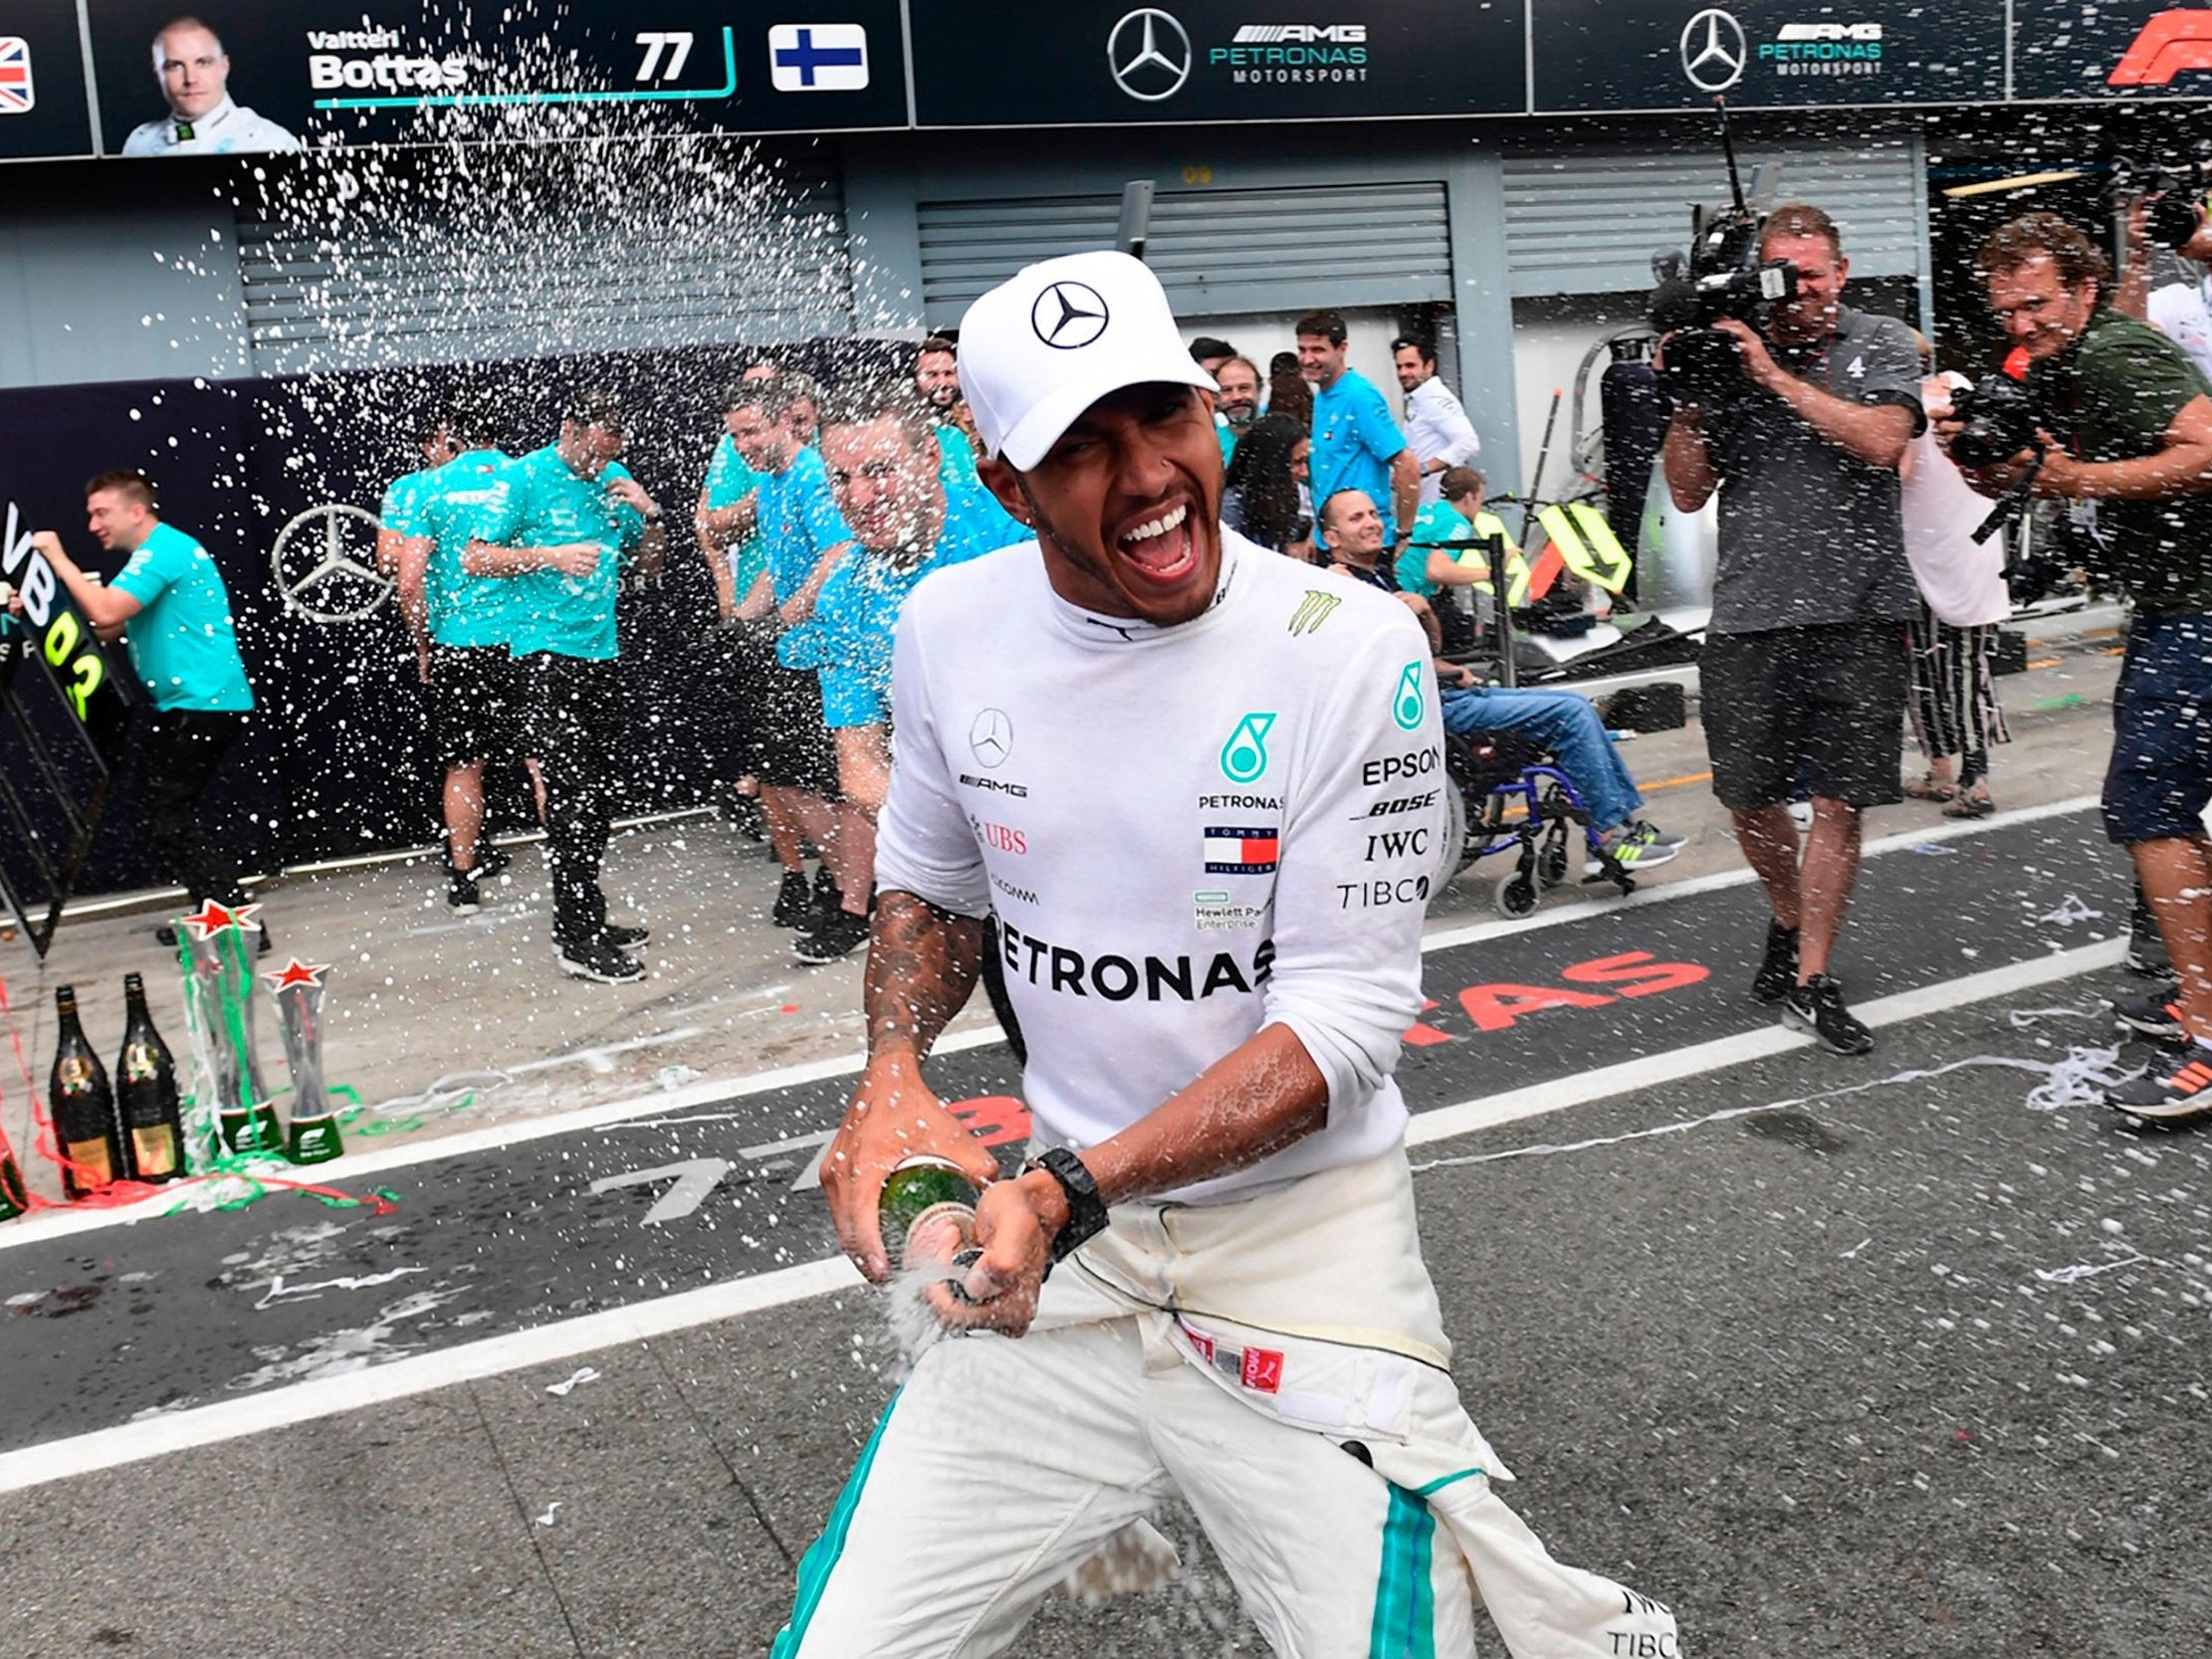 Hamilton celebrated his Monza victory after upsetting the home fans